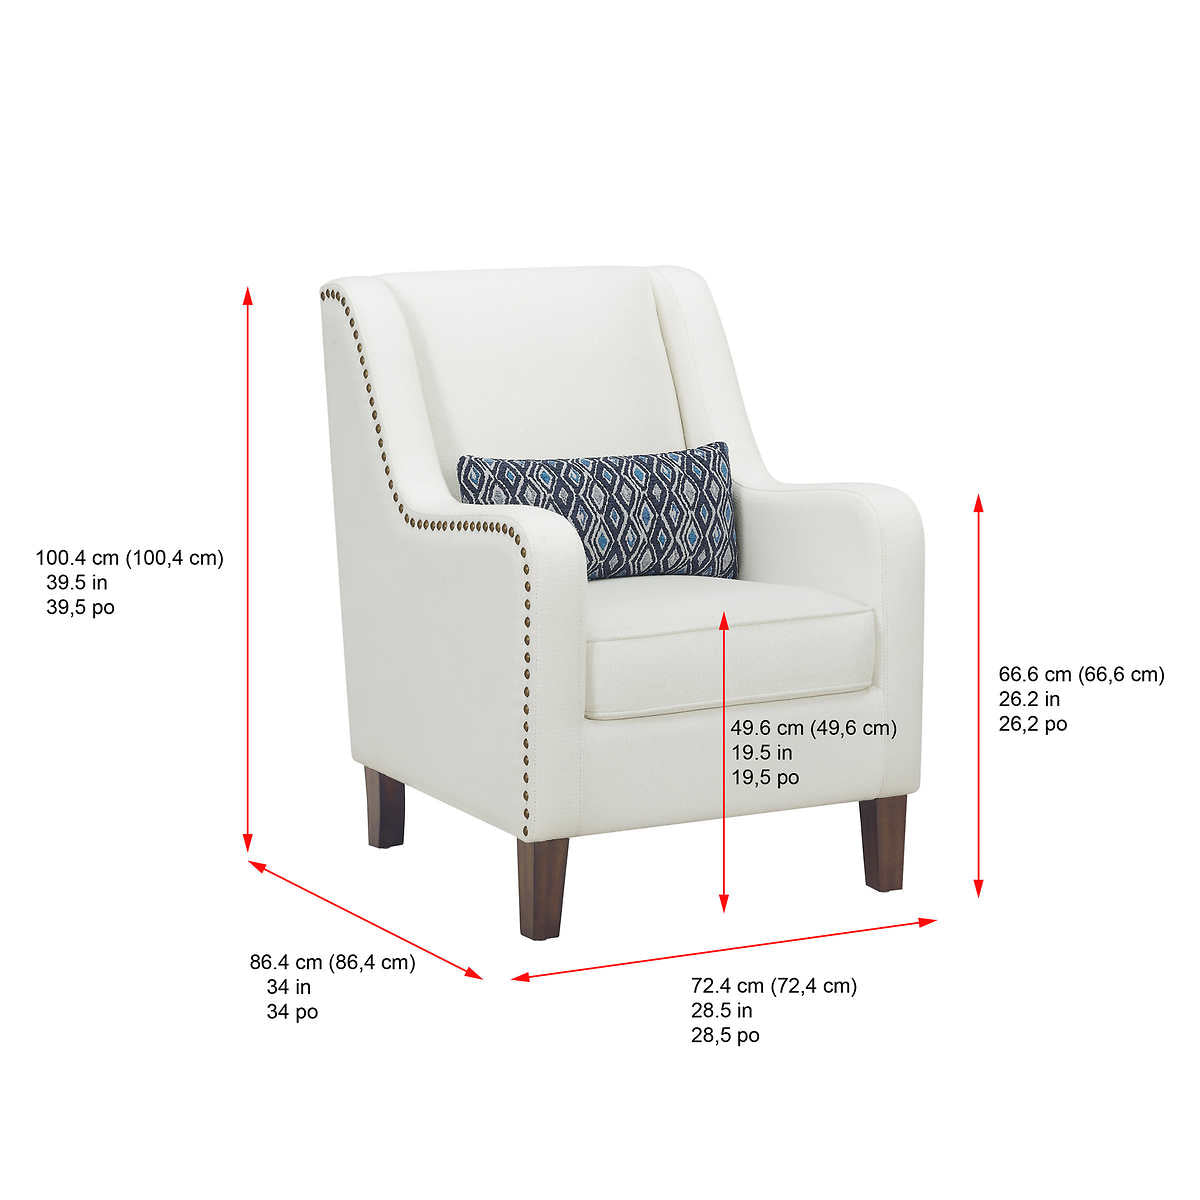 NEW in Box - Costco - True Innovations Mila Fabric Accent Chair - Retail $349